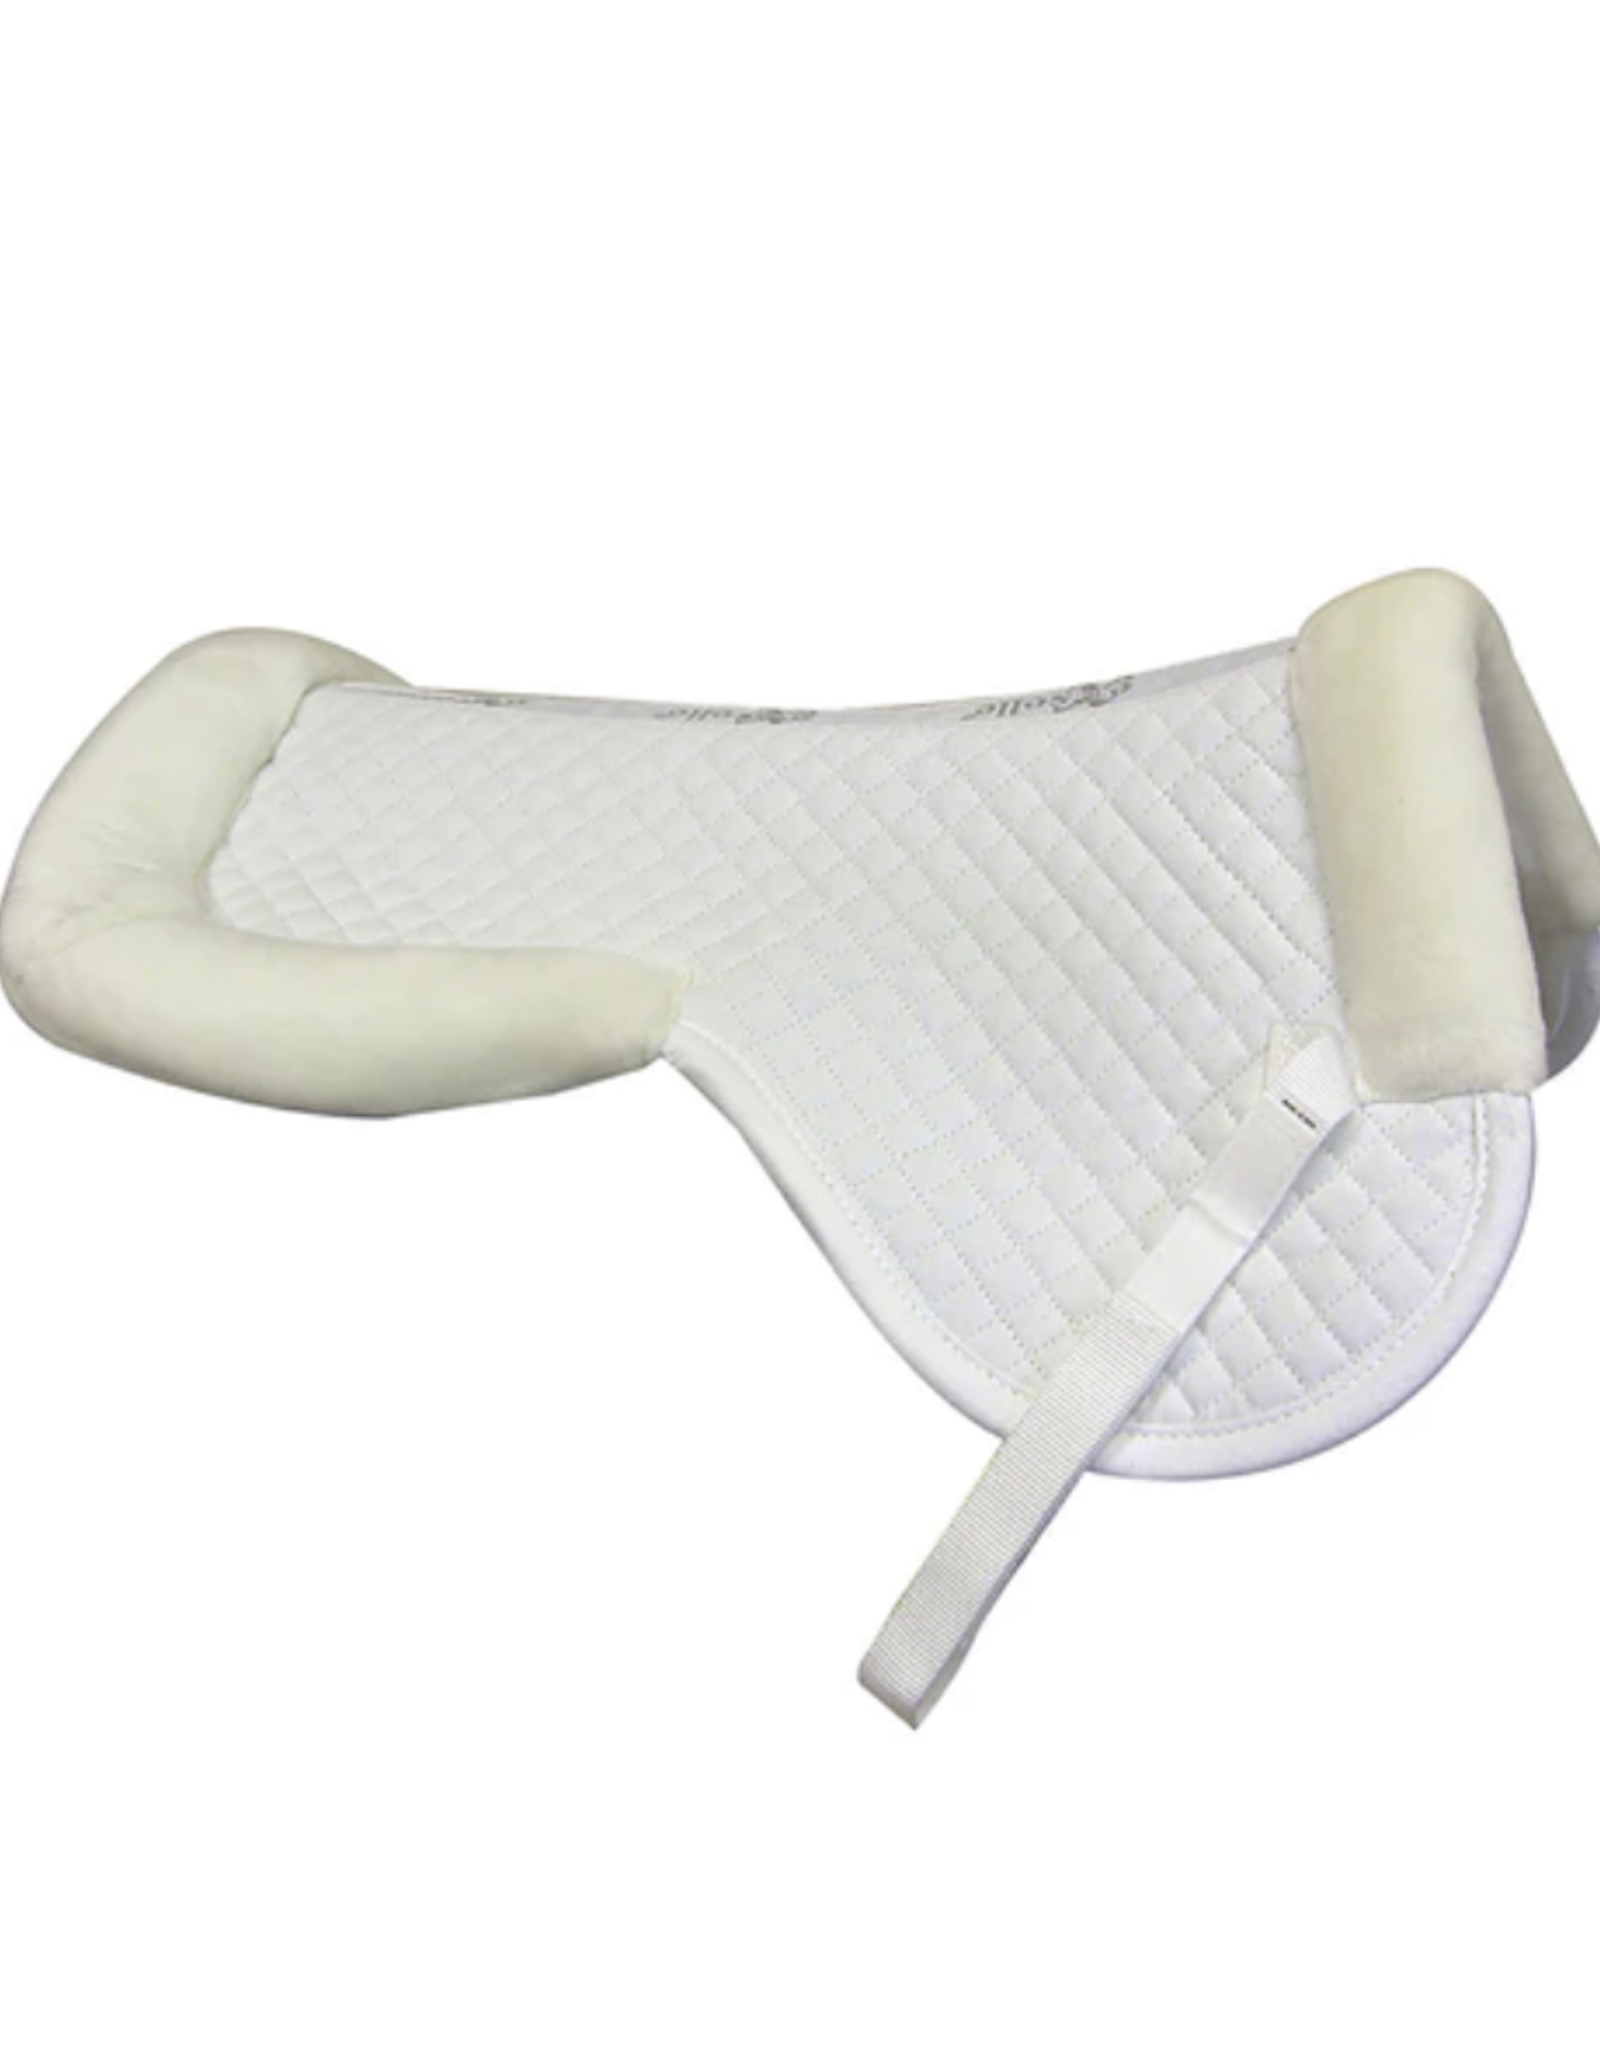 Exselle Wither Relief Half Pad